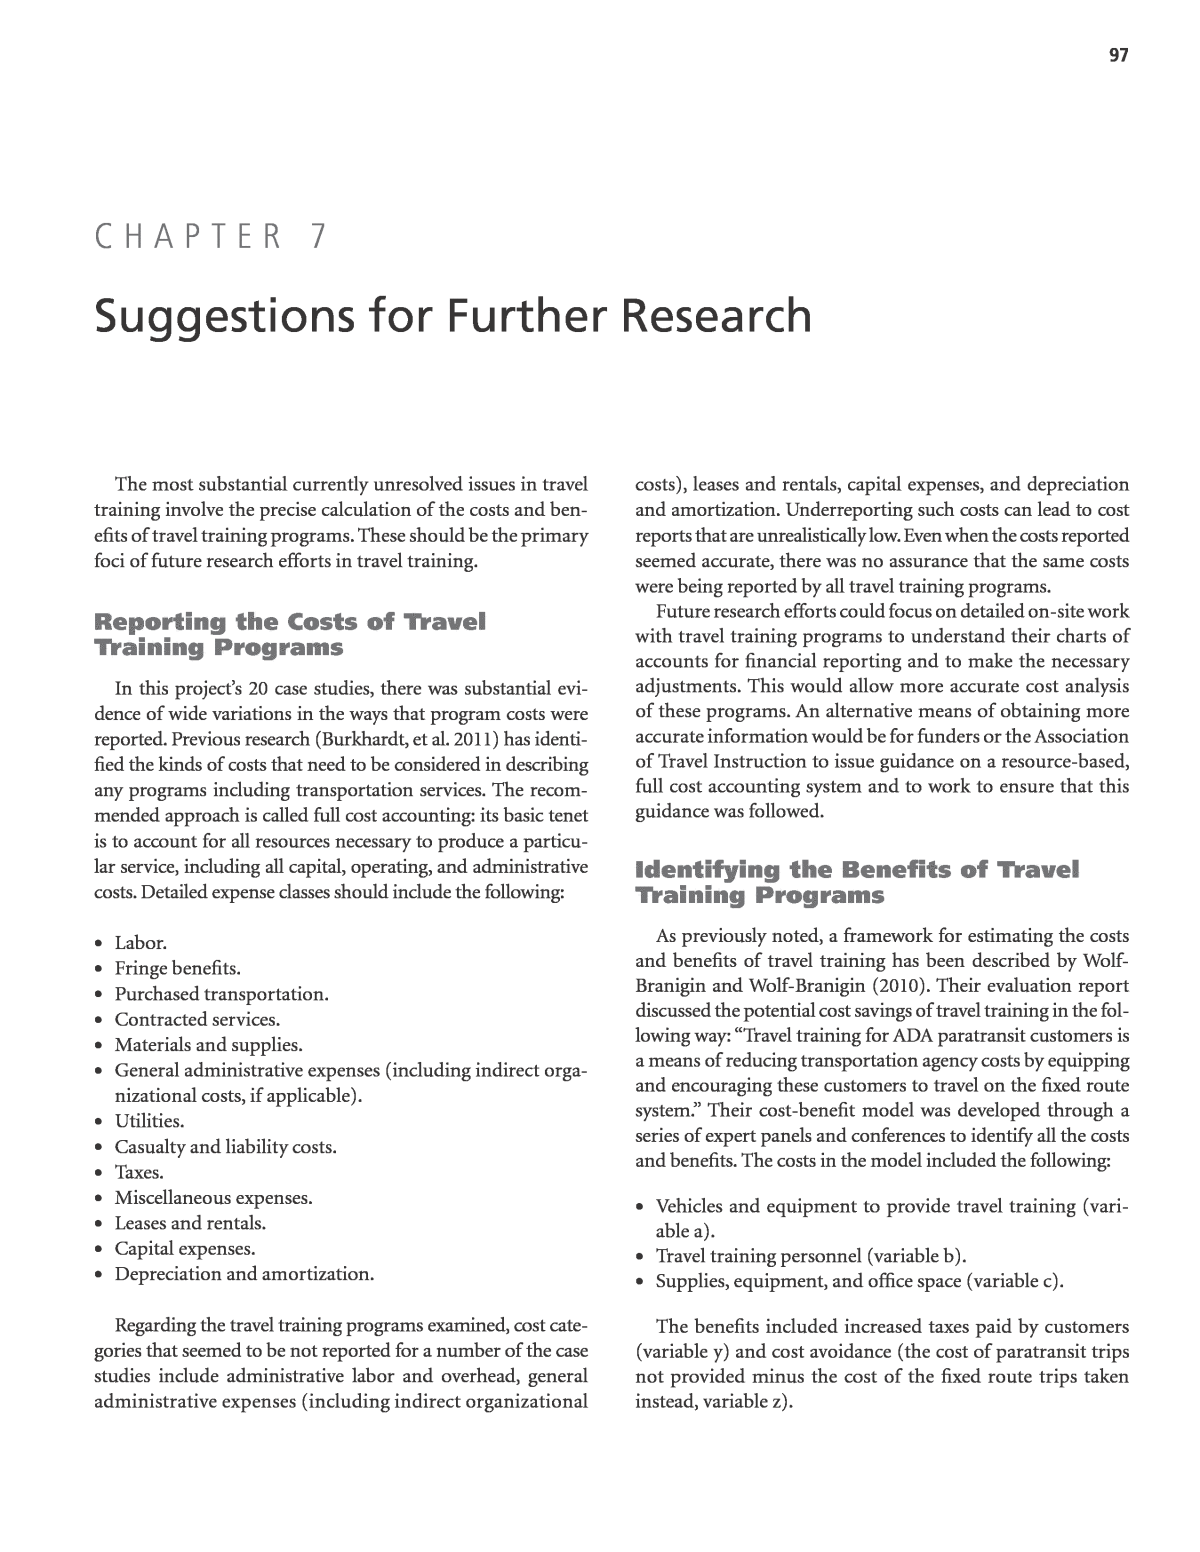 suggestions for further studies in research